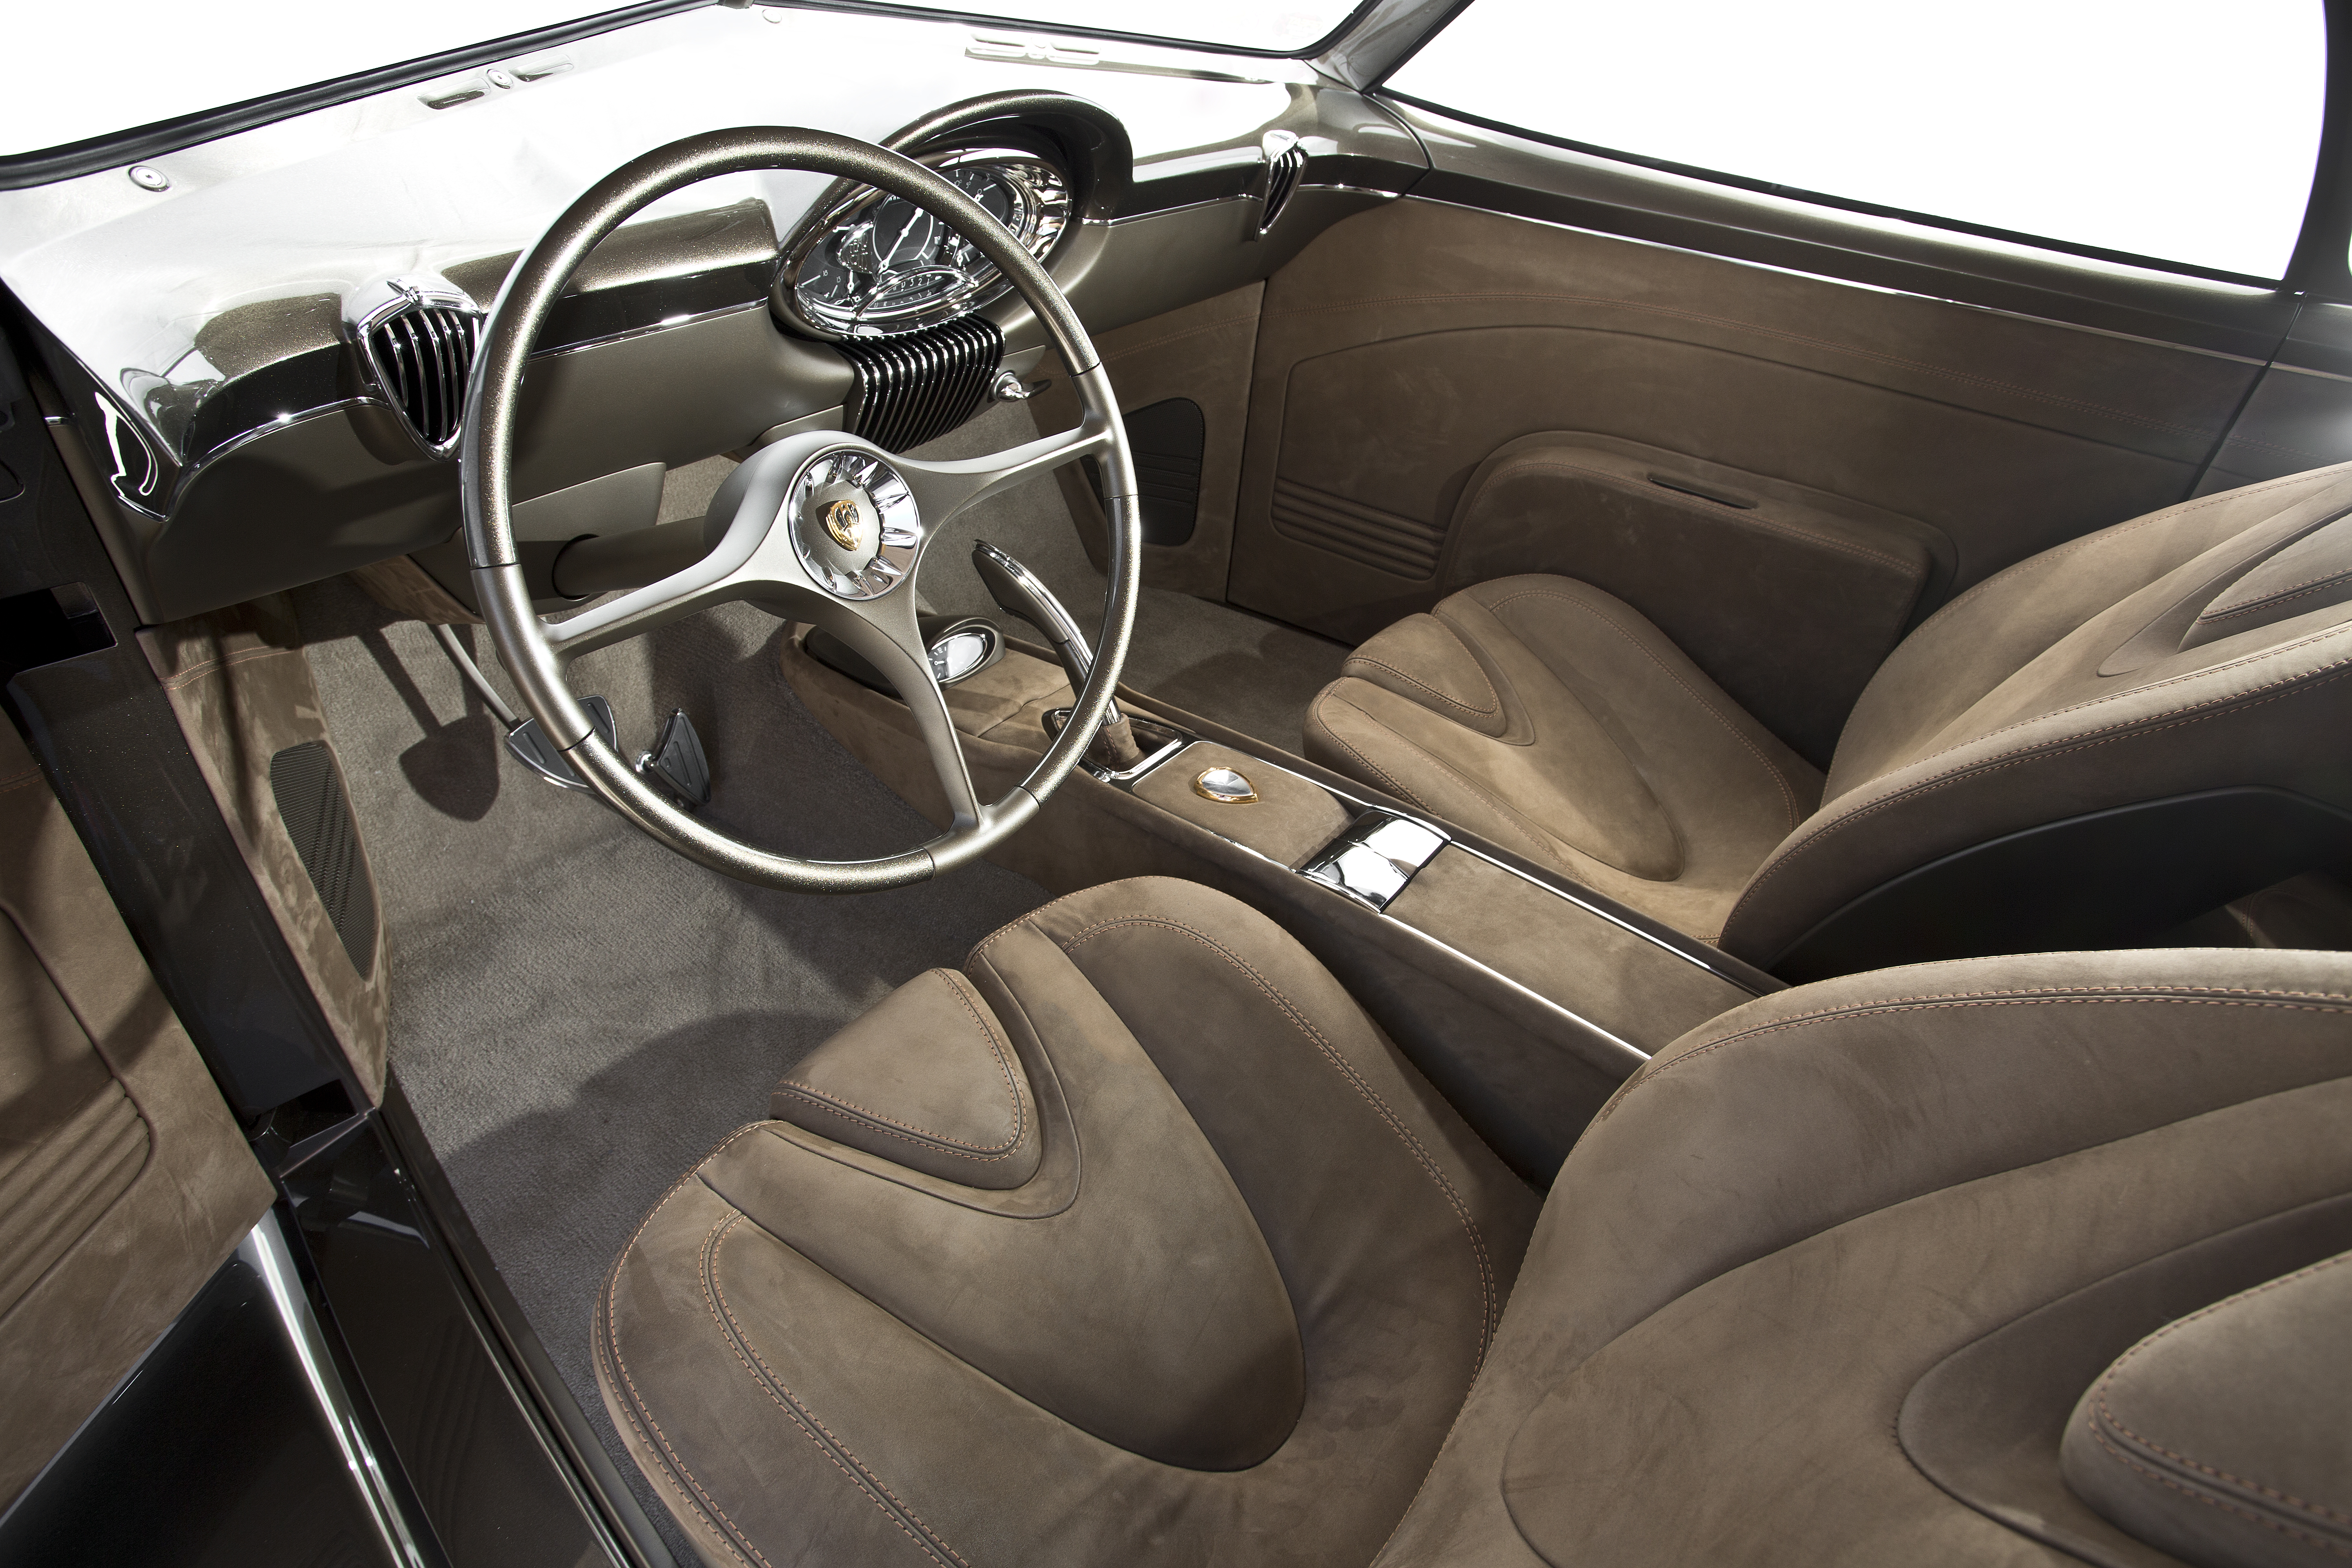 New Tech in Old Cars: Upgrading with a Custom Car Interior